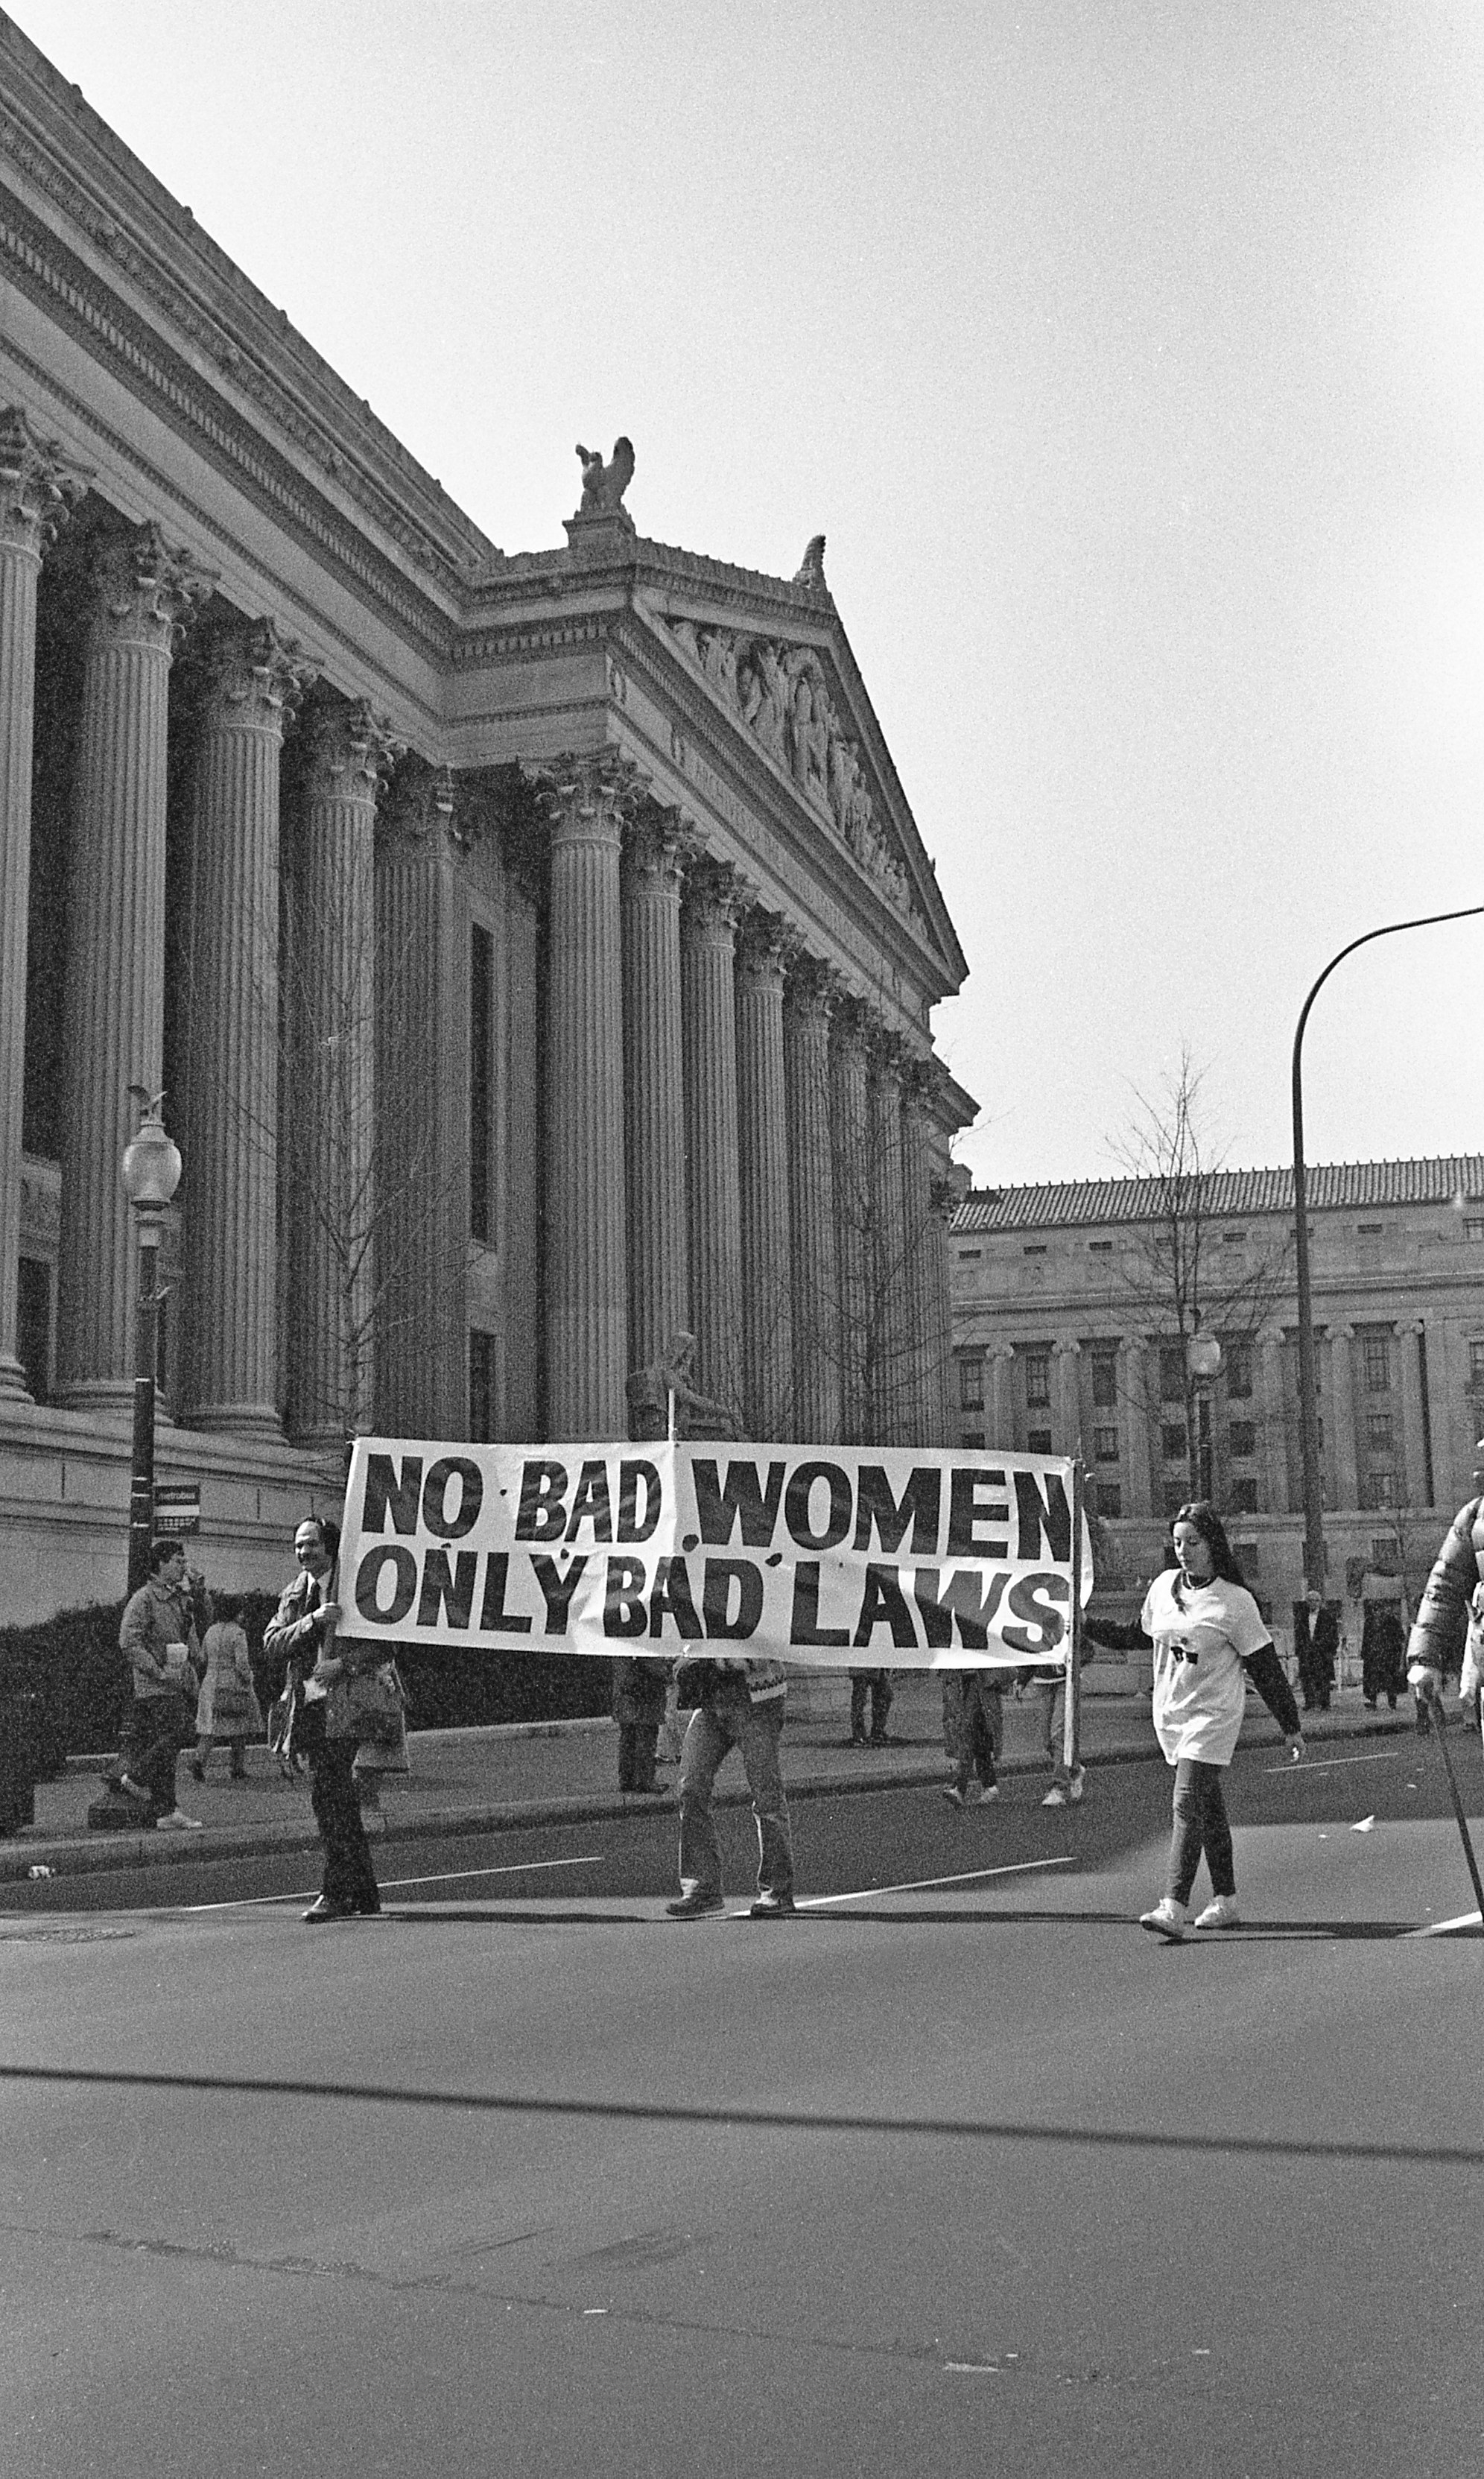 People walking in the street hold up a large banner that reads &quot;no bad women, only bad laws&quot;